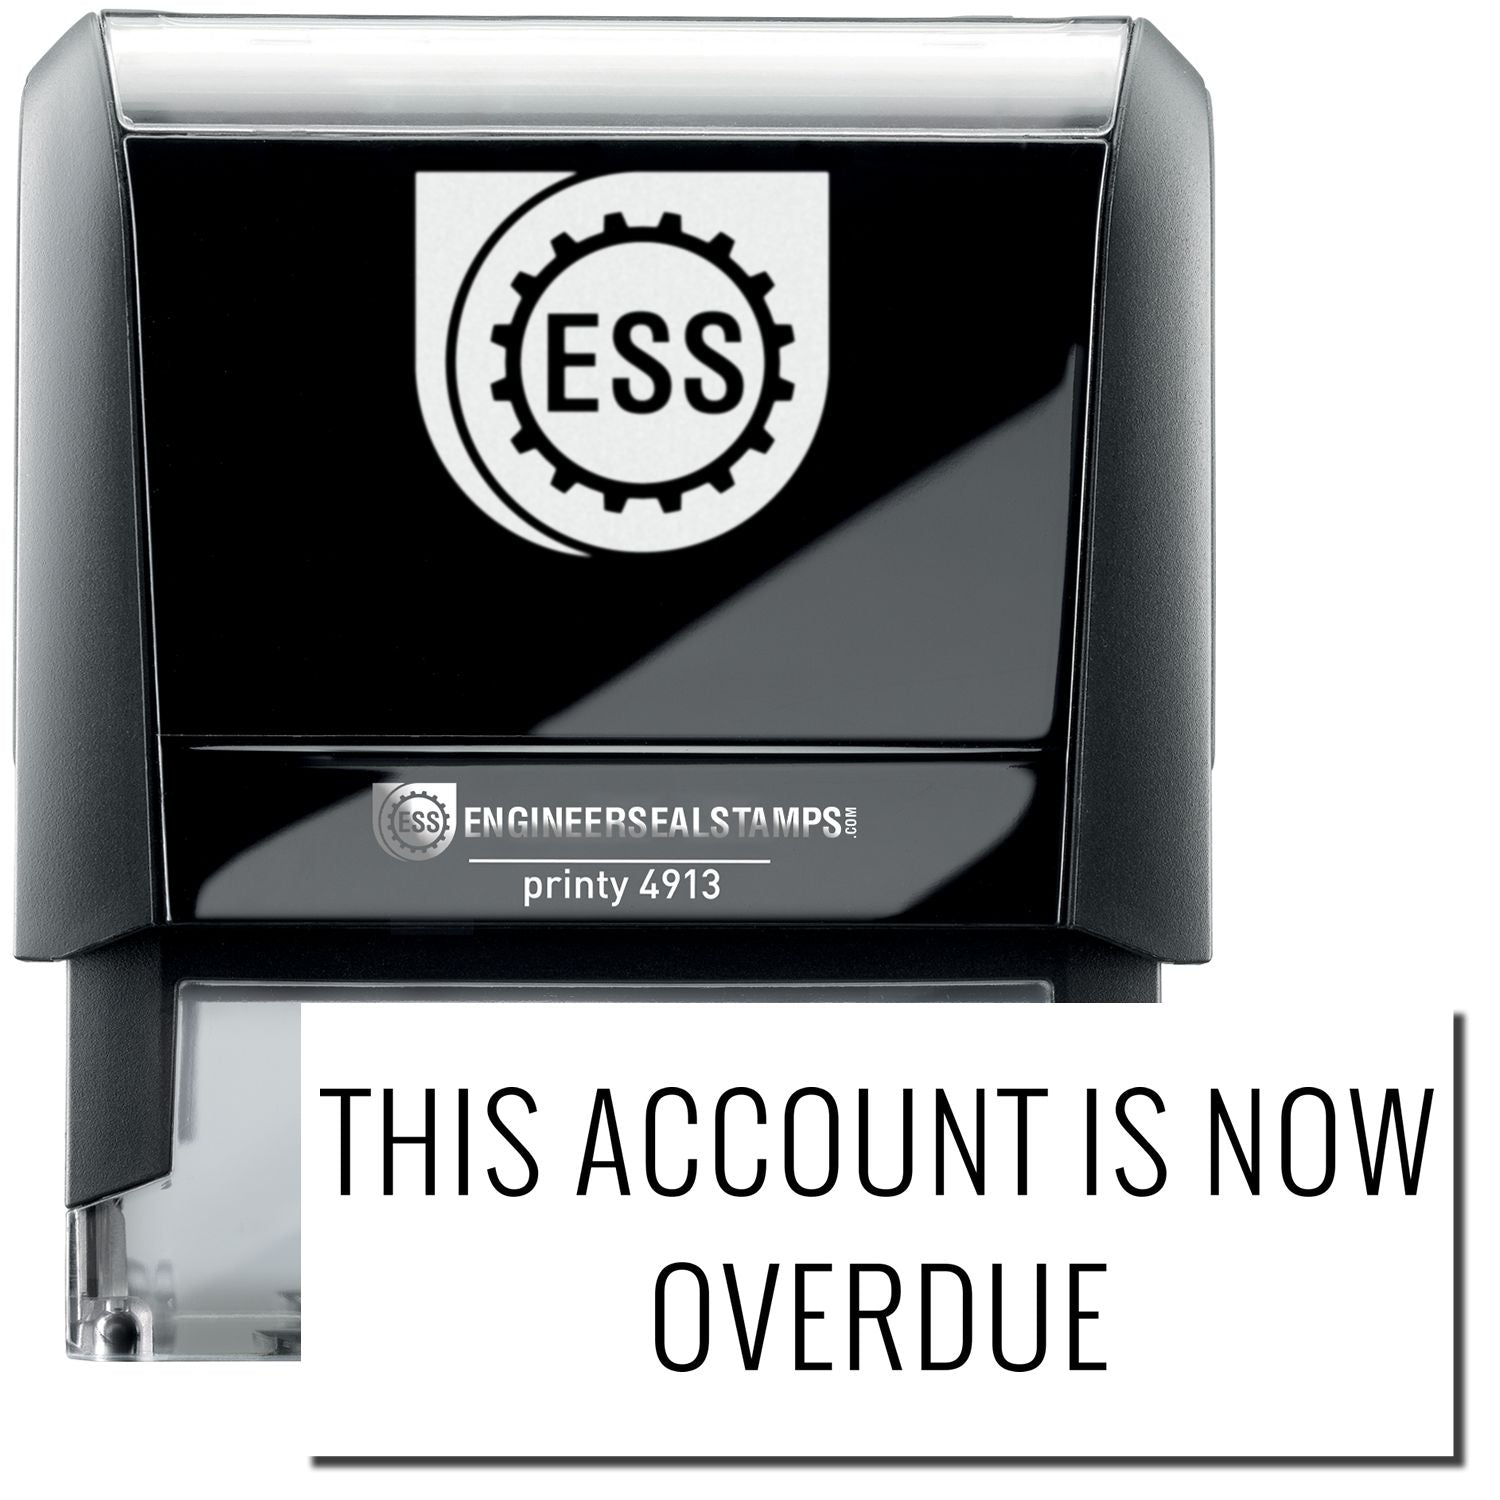 A self-inking stamp with a stamped image showing how the text "THIS ACCOUNT IS NOW OVERDUE" in a large narrow font is displayed by it after stamping.